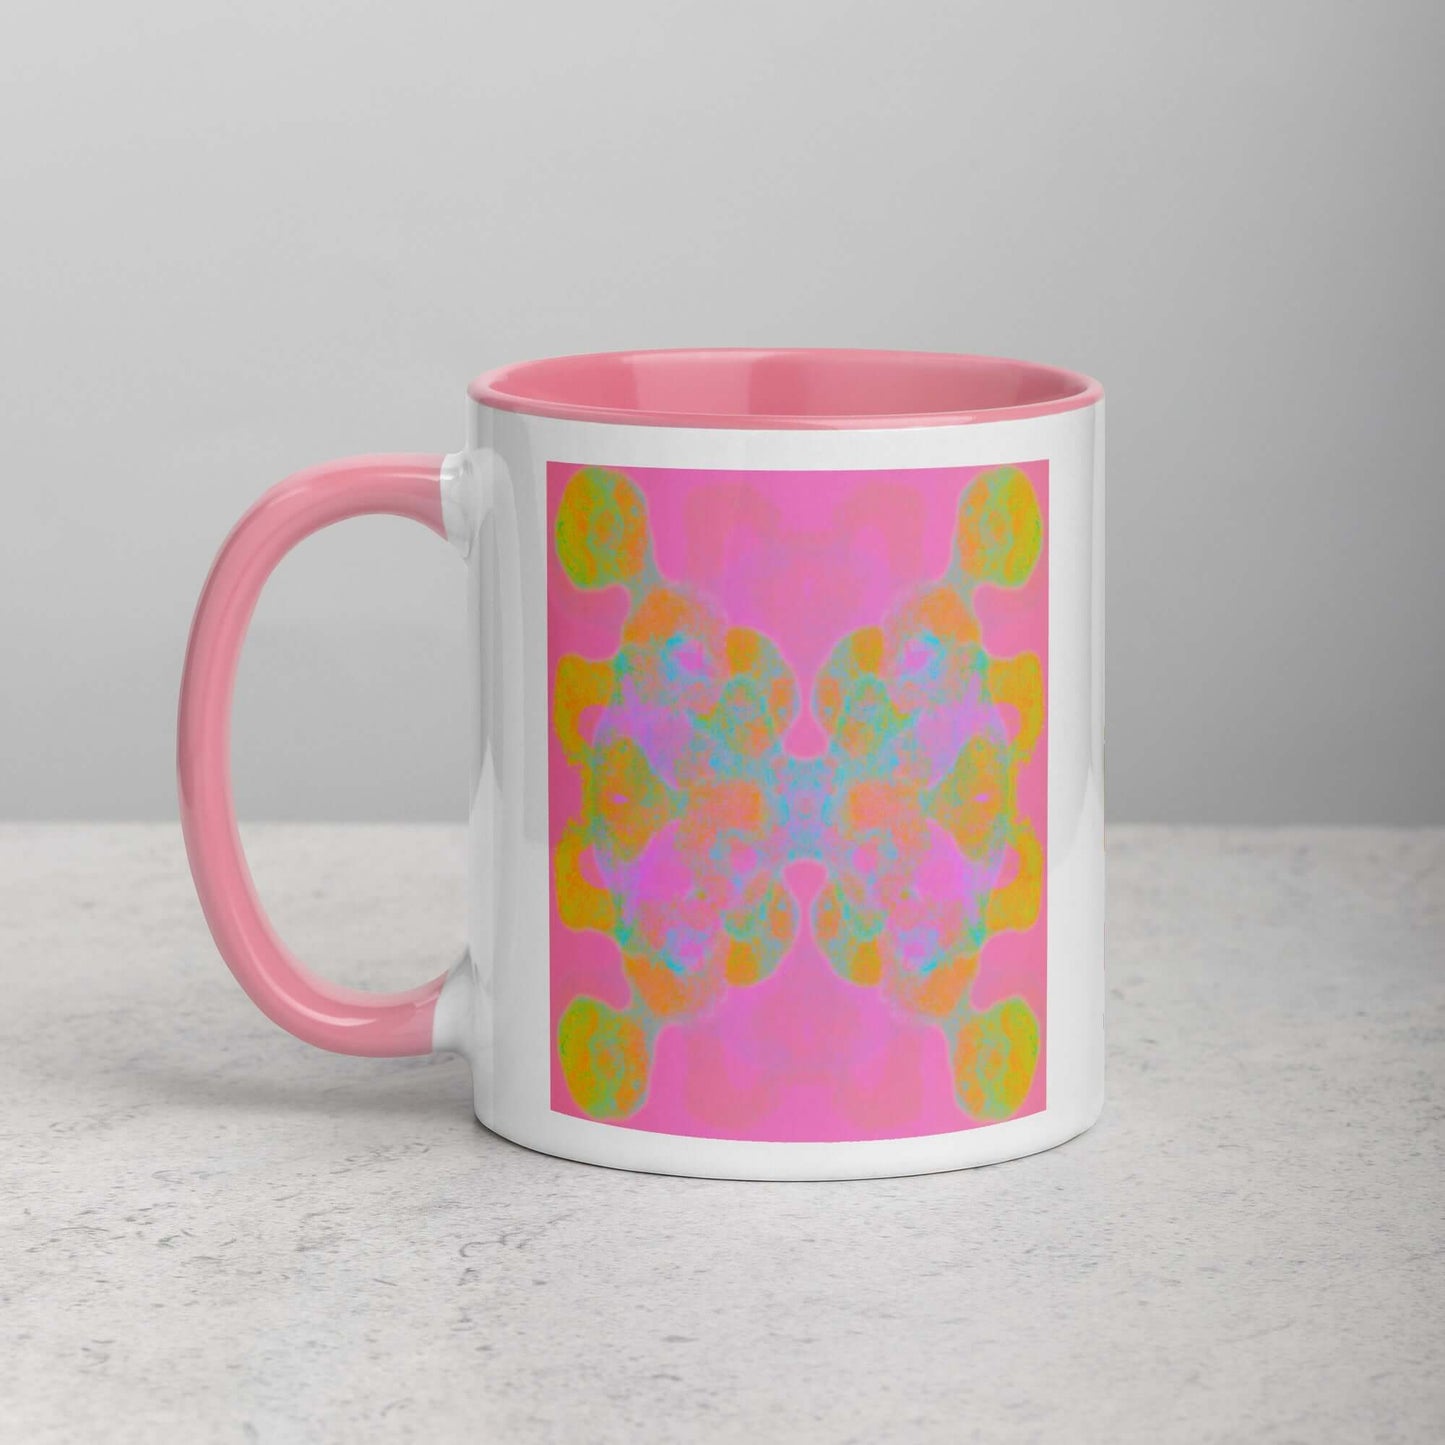 Colorful Abstract Butterfly Shape on Pink Background “Double the Fun” Abstract Art Mug with Light Pink Color Inside Left Handed Front View